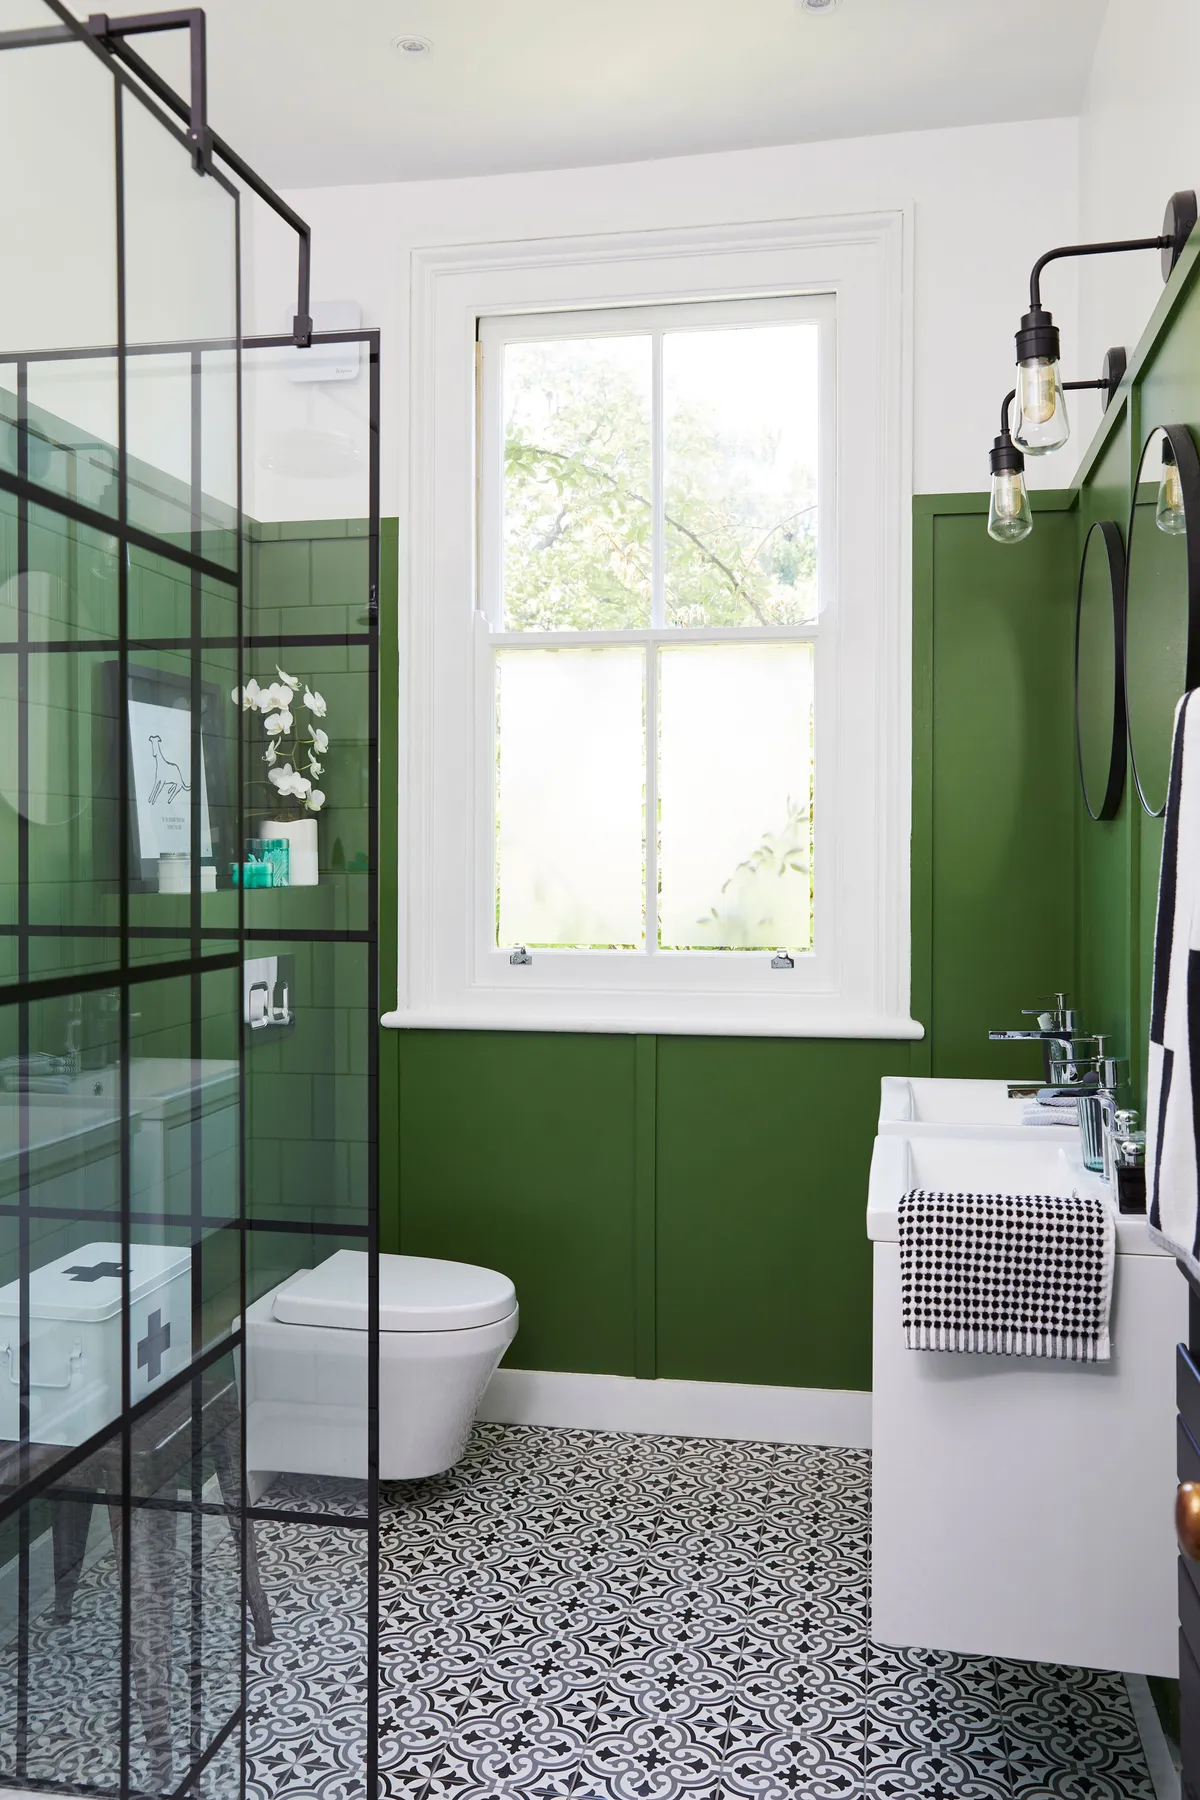 Good idea! Crittall-style screens bring a touch of industrial styling to a bathroom. If possible, get the pattern digitally printed so the screens are smooth and easy to clean.